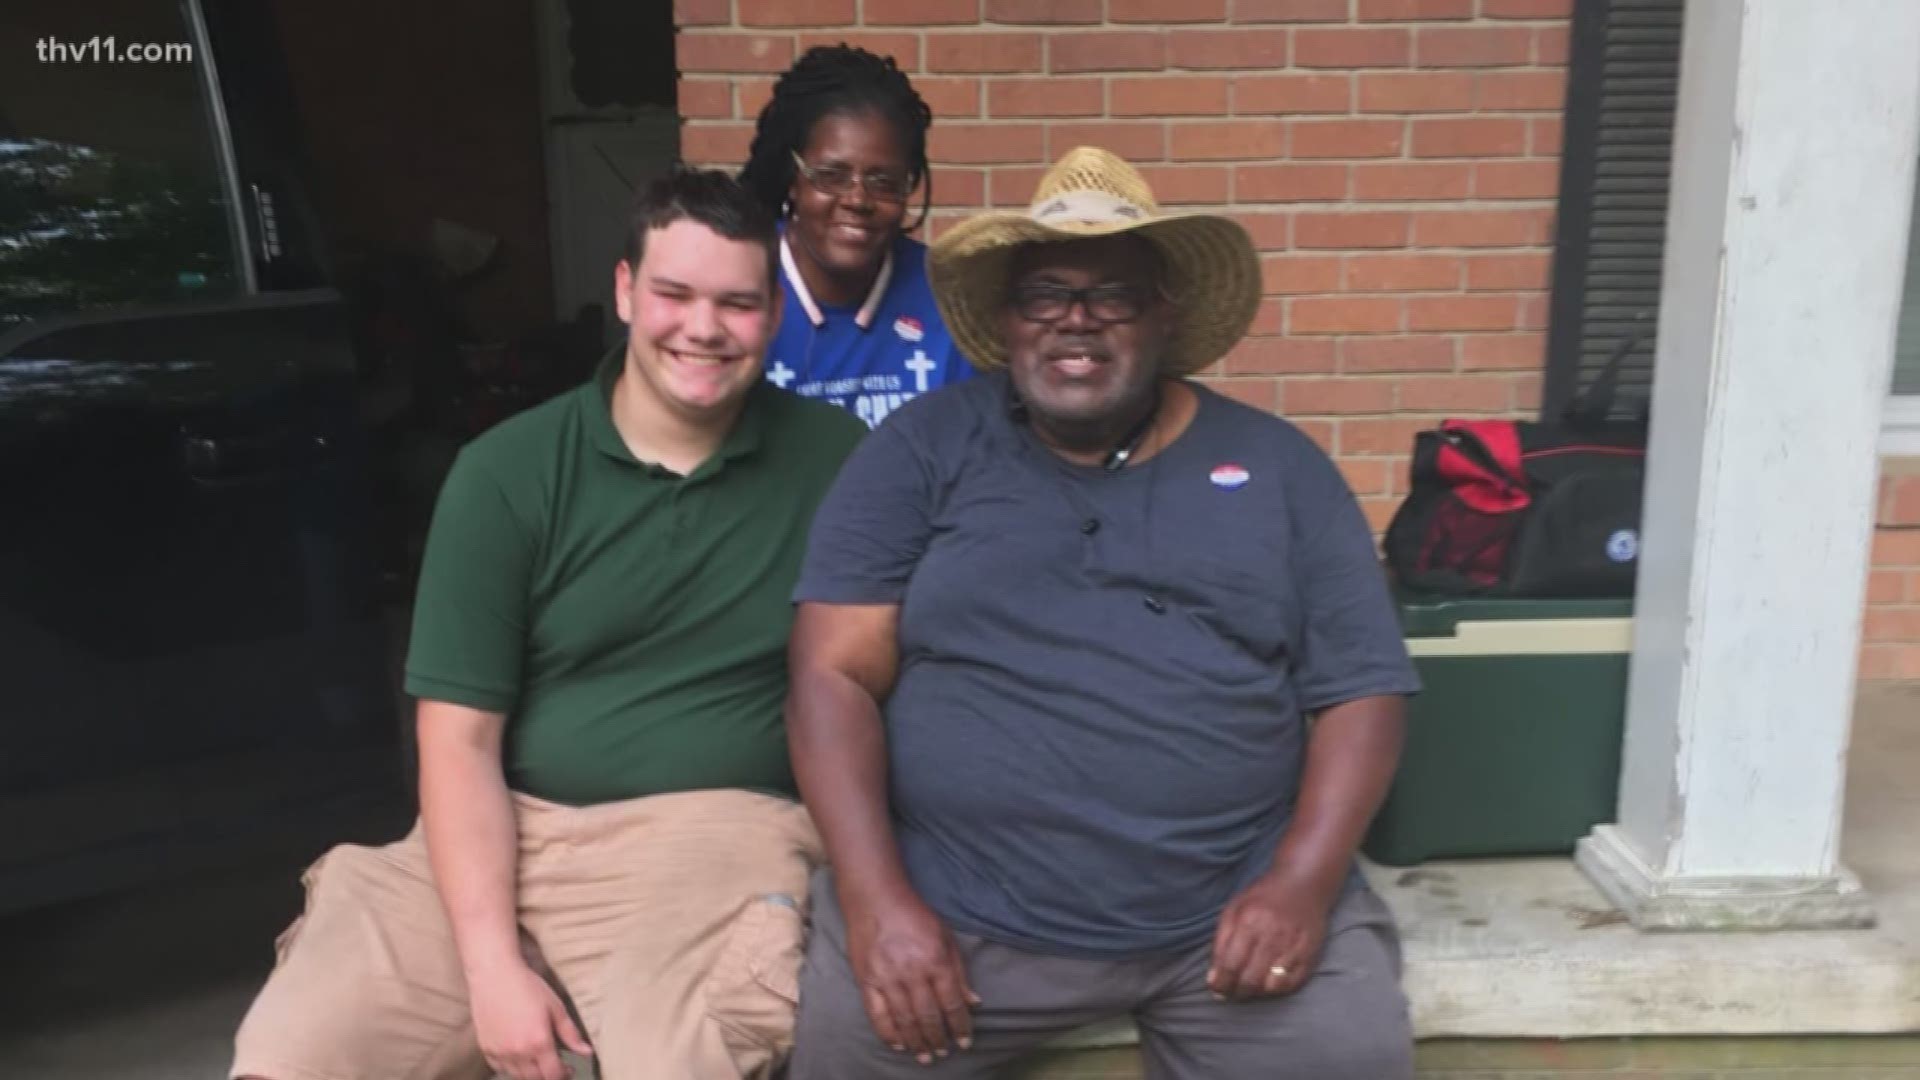 The adoption game changes when you're a teenager in foster care. George was lucky enough to find a foster family he loves.